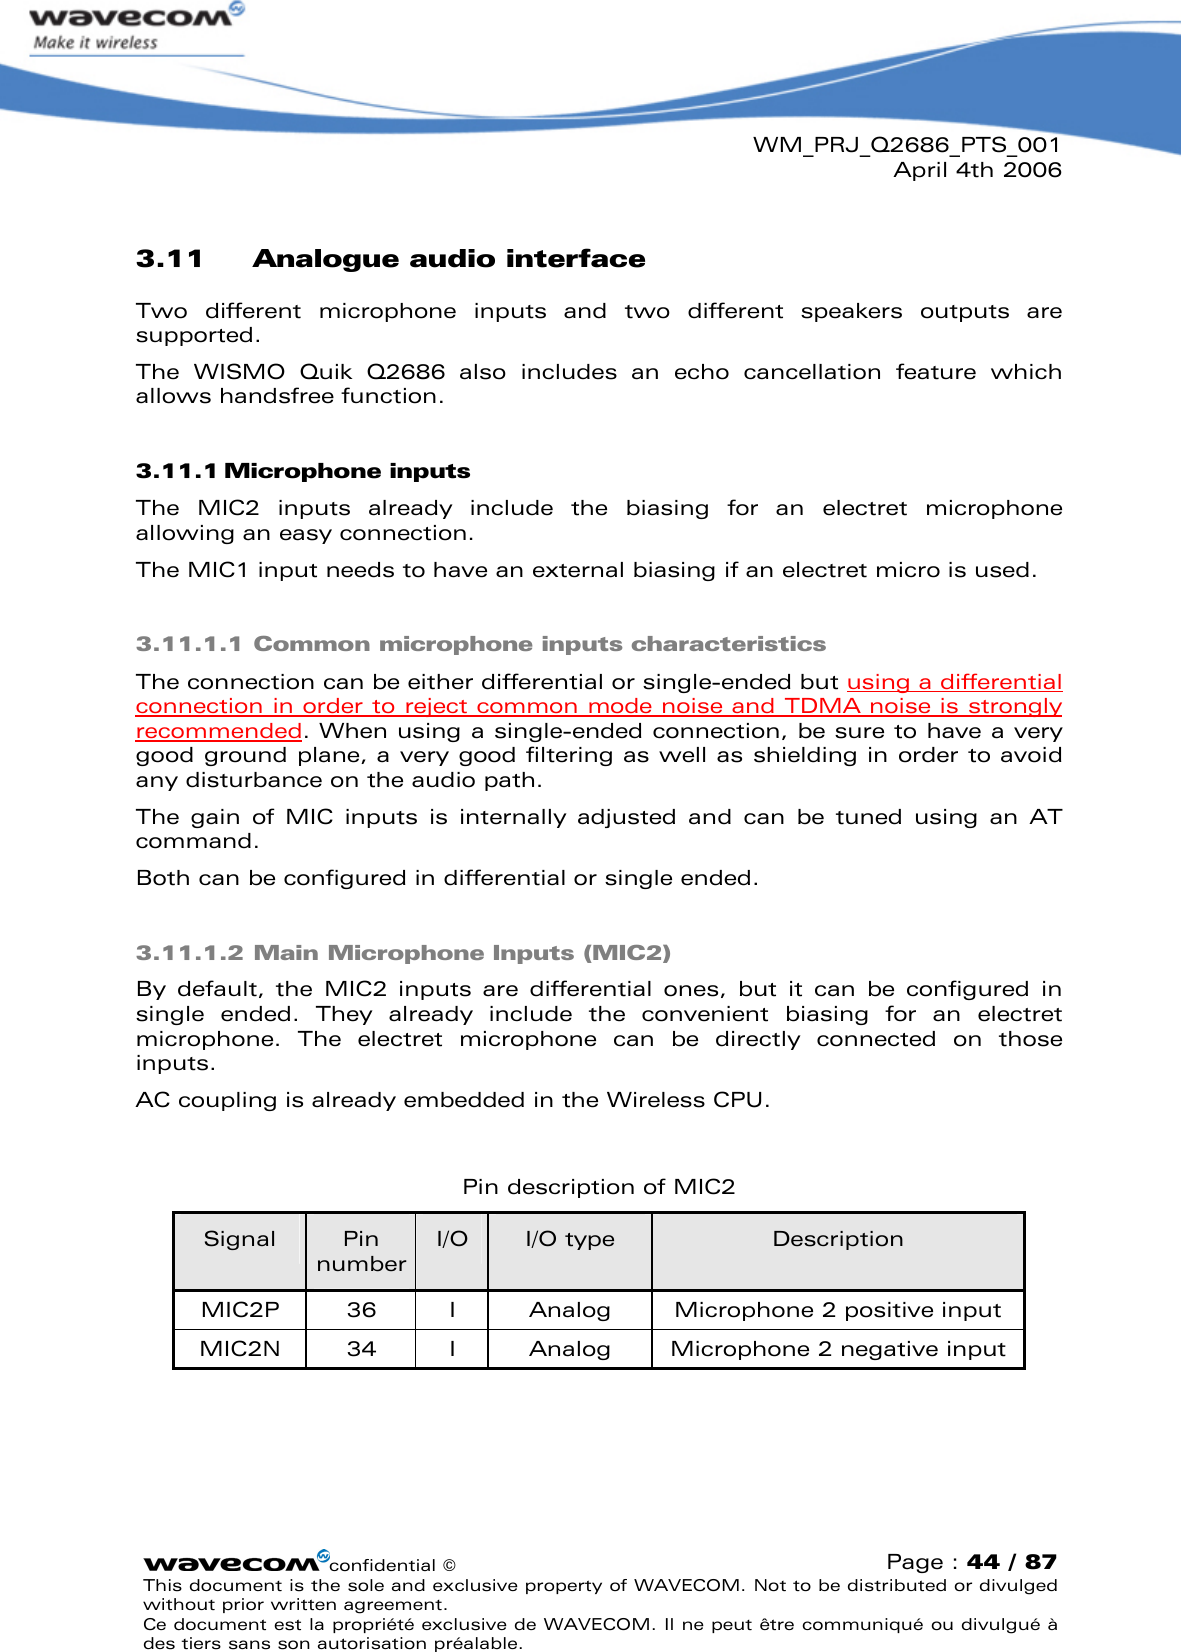 WM_PRJ_Q2686_PTS_001April 4th 2006confidential ©Page : 44 / 87This document is the sole and exclusive property of WAVECOM. Not to be distributed or divulged without prior written agreement. Ce document est la propriété exclusive de WAVECOM. Il ne peut être communiqué ou divulgué à des tiers sans son autorisation préalable.3.11 Analogue audio interfaceTwo  different  microphone  inputs  and  two  different  speakers  outputs  are supported. The  WISMO  Quik  Q2686  also  includes  an  echo  cancellation  feature  which allows handsfree function.3.11.1 Microphone inputsThe  MIC2  inputs  already  include  the  biasing  for  an  electret  microphone allowing an easy connection.The MIC1 input needs to have an external biasing if an electret micro is used.3.11.1.1 Common microphone inputs characteristicsThe connection can be either differential or single-ended but using a differential connection in order to reject common mode noise and TDMA noise is strongly recommended. When using a single-ended connection, be sure to have a very good ground plane, a very good filtering as well as shielding in order to avoid any disturbance on the audio path.The  gain  of  MIC  inputs  is  internally  adjusted  and  can  be  tuned  using  an  AT command.Both can be configured in differential or single ended.3.11.1.2 Main Microphone Inputs (MIC2)By default, the  MIC2  inputs  are  differential  ones,  but  it  can  be  configured  in single  ended.  They  already  include  the  convenient  biasing  for  an  electret microphone.  The  electret  microphone  can  be  directly  connected  on  those inputs. AC coupling is already embedded in the Wireless CPU.Pin description of MIC2Signal Pin numberI/O I/O type DescriptionMIC2P 36 I Analog Microphone 2 positive inputMIC2N 34 I Analog Microphone 2 negative input